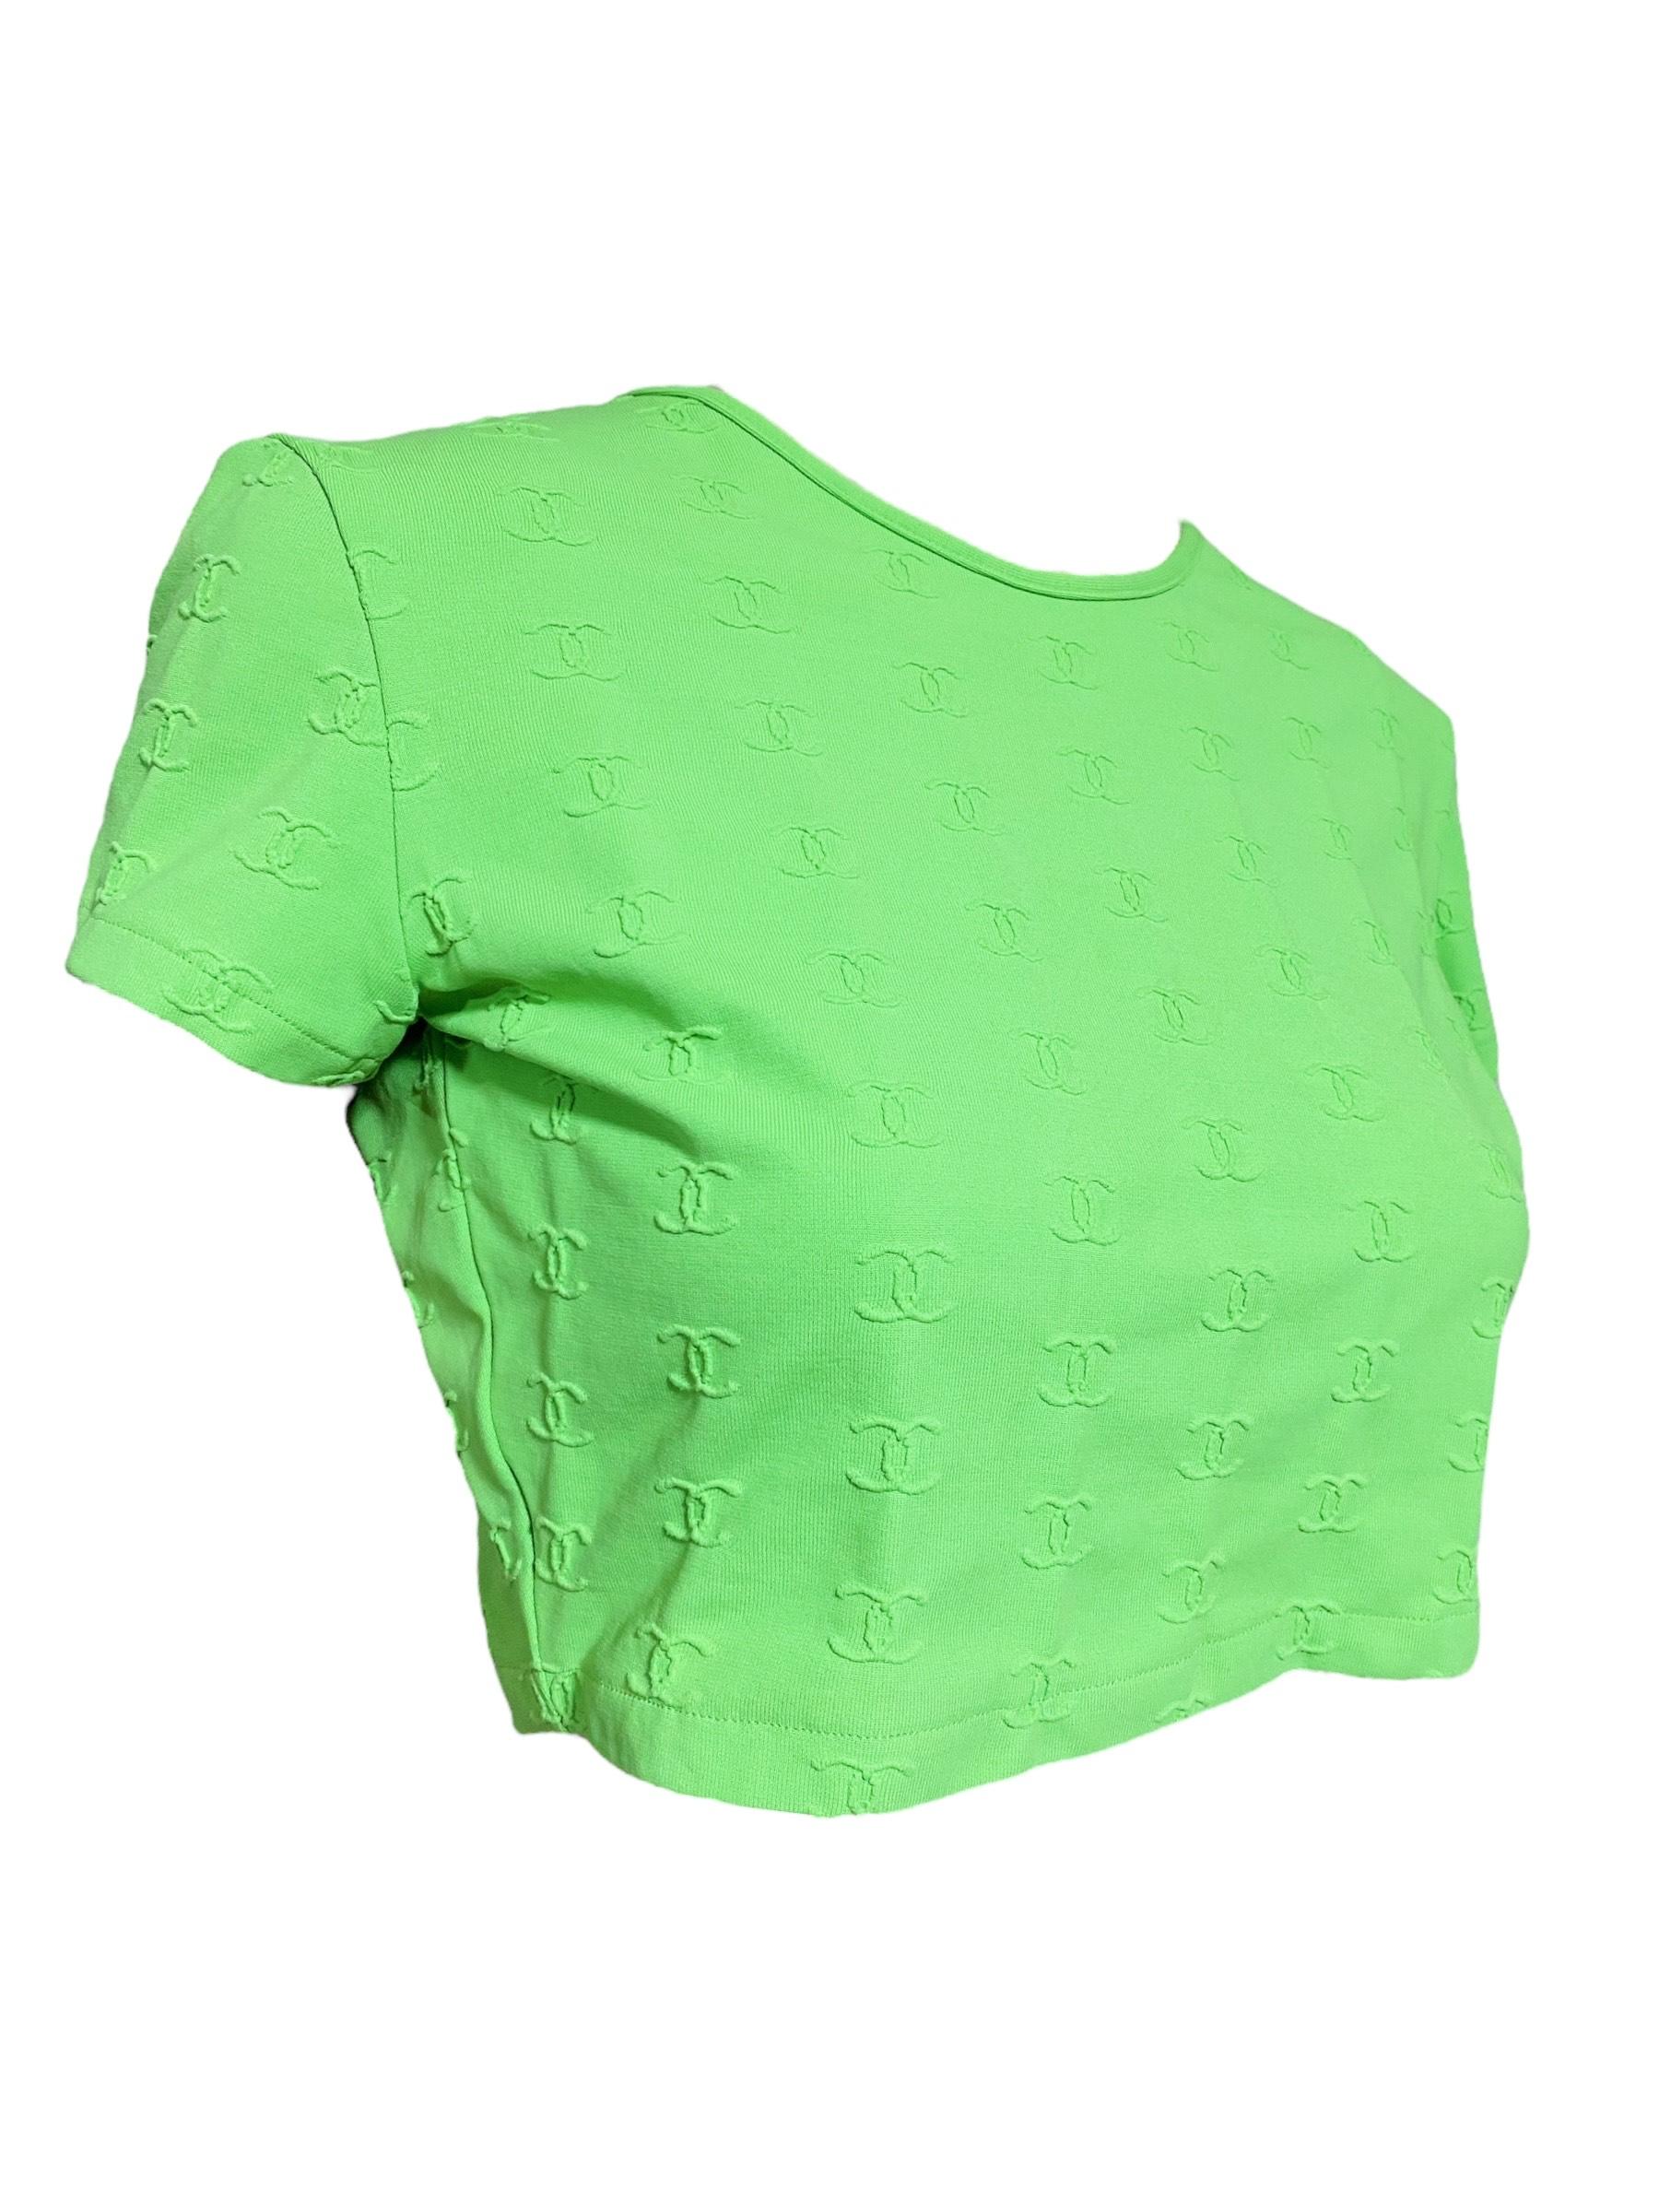 Iconic and extremely hard-to-find Chanel top. Karl Lagerfeld designed it in 1997 for Coco Chanel.  This Crop Top is made of a polyester blend and features embroidered logos in green. 

Designer: Chanel
Dimensions (Inches) (Taken Flat)
Length: